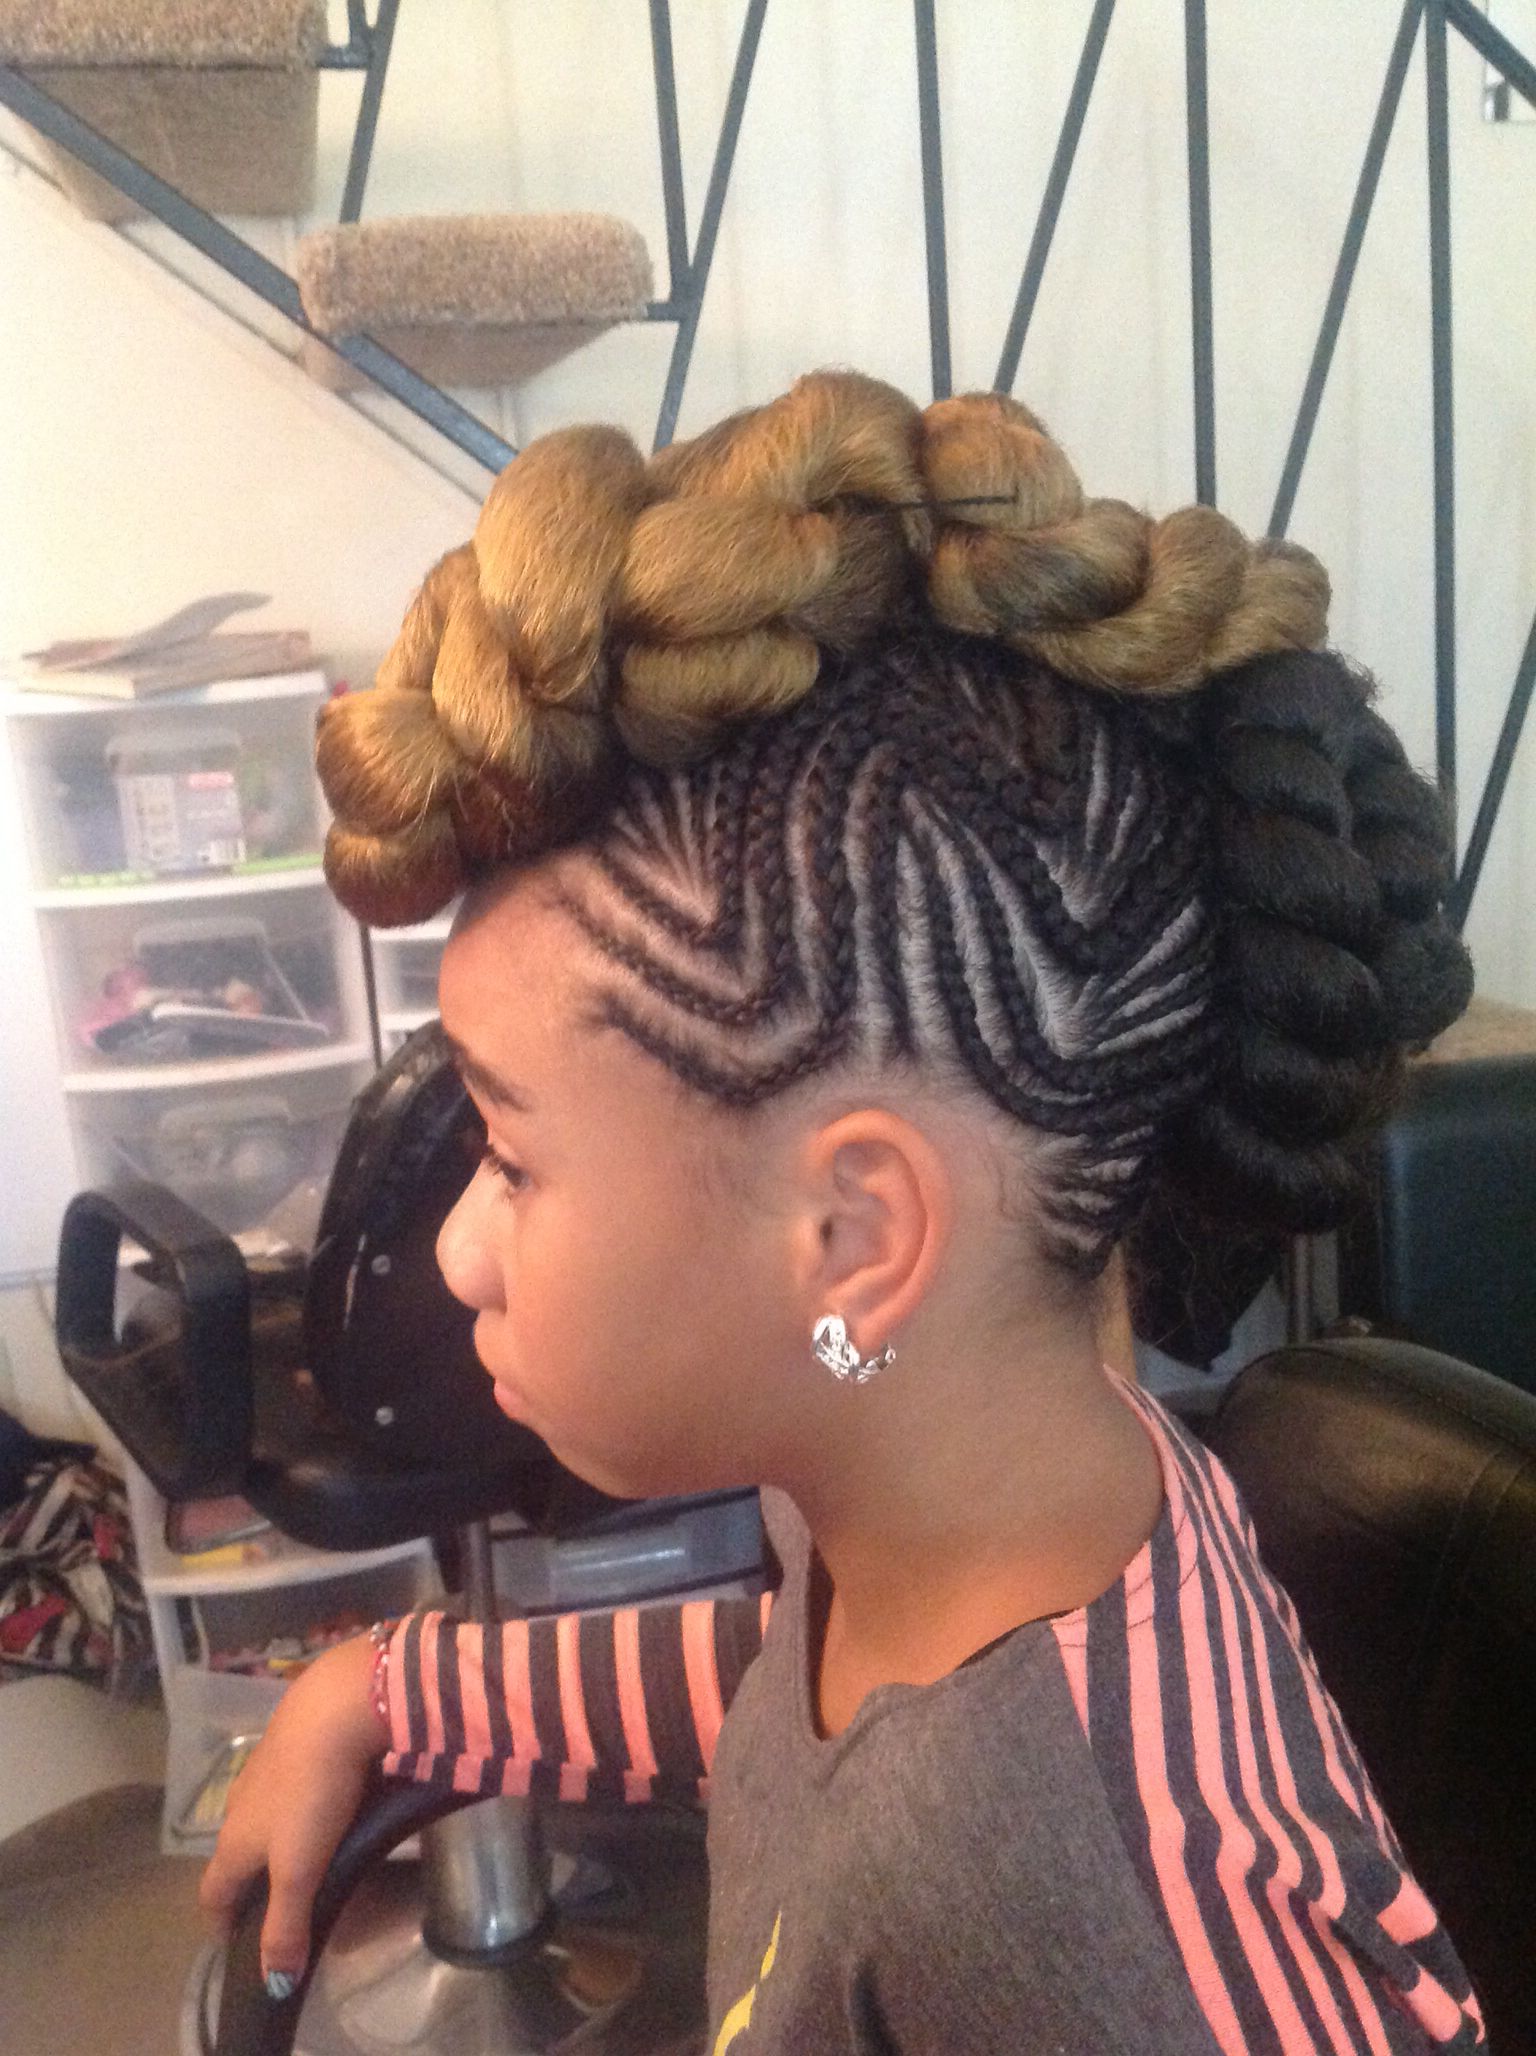 15 Foremost Braided Mohawk Hairstyles – Mohawk With Braids With Most Recent Braided Mohawk Haircuts (View 10 of 20)